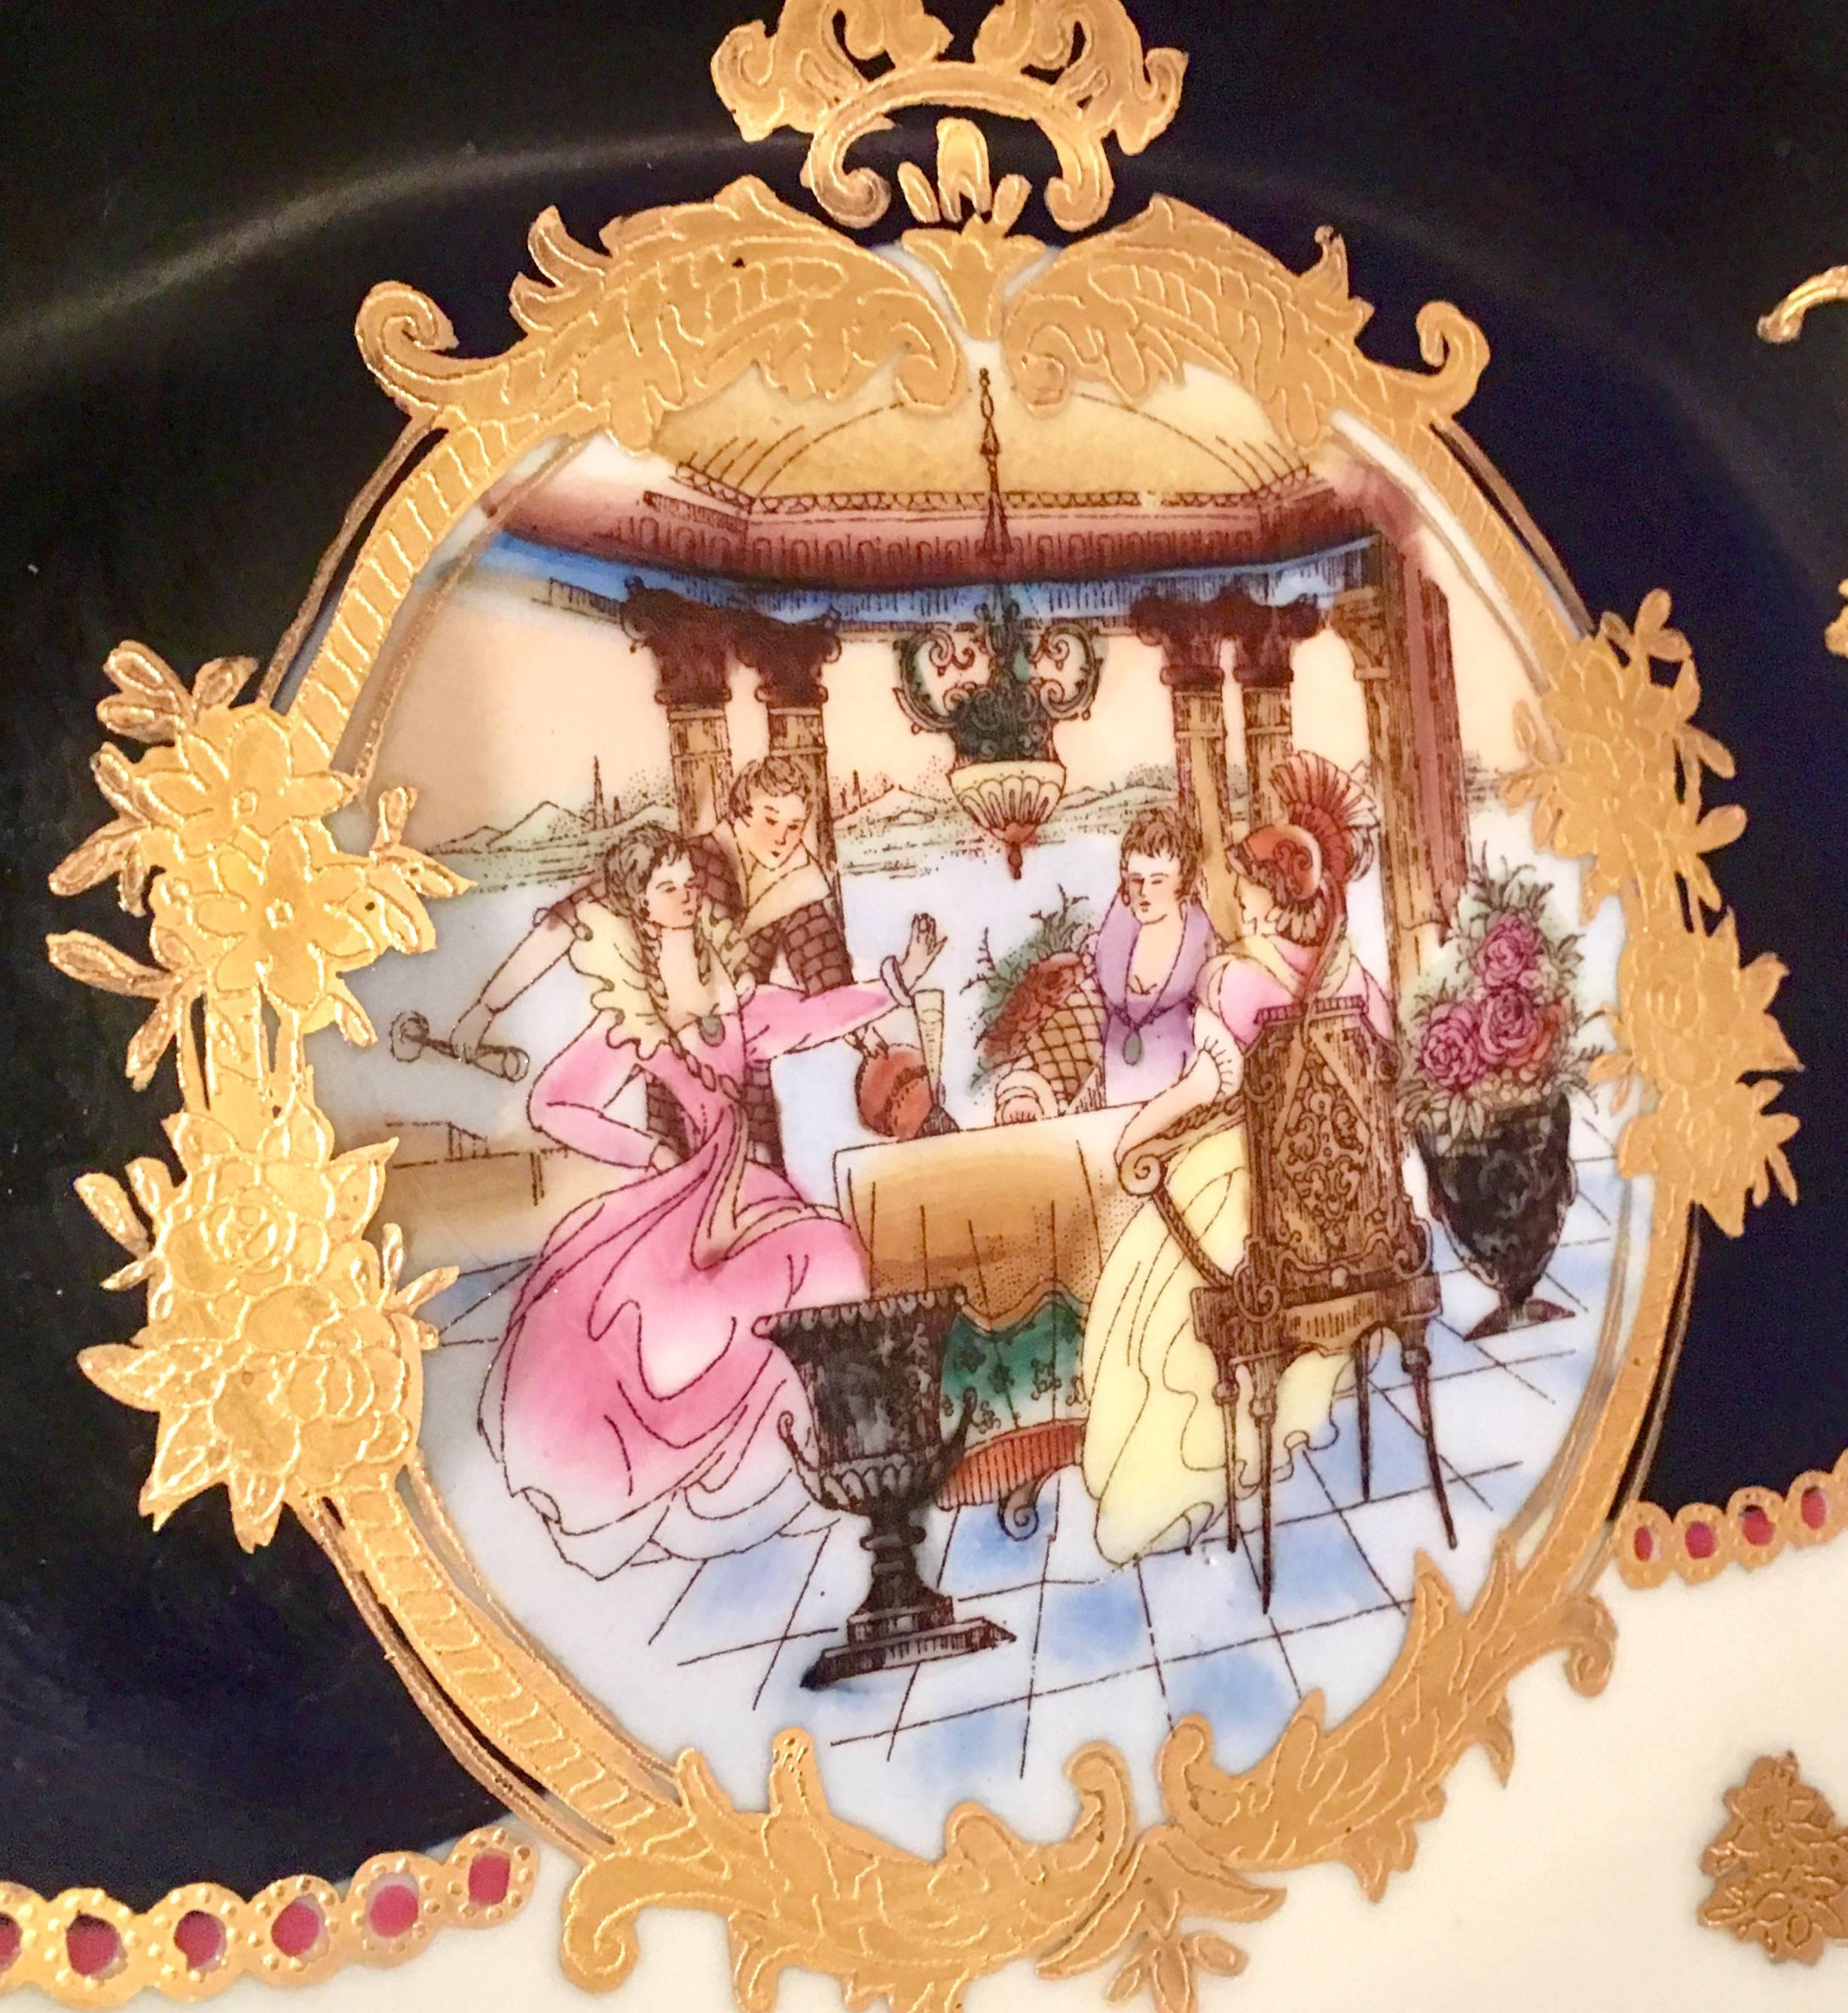 Porcelain 20th Century French Sevres Limoges Style Cobalt & Gold Tray & Box Set of Three